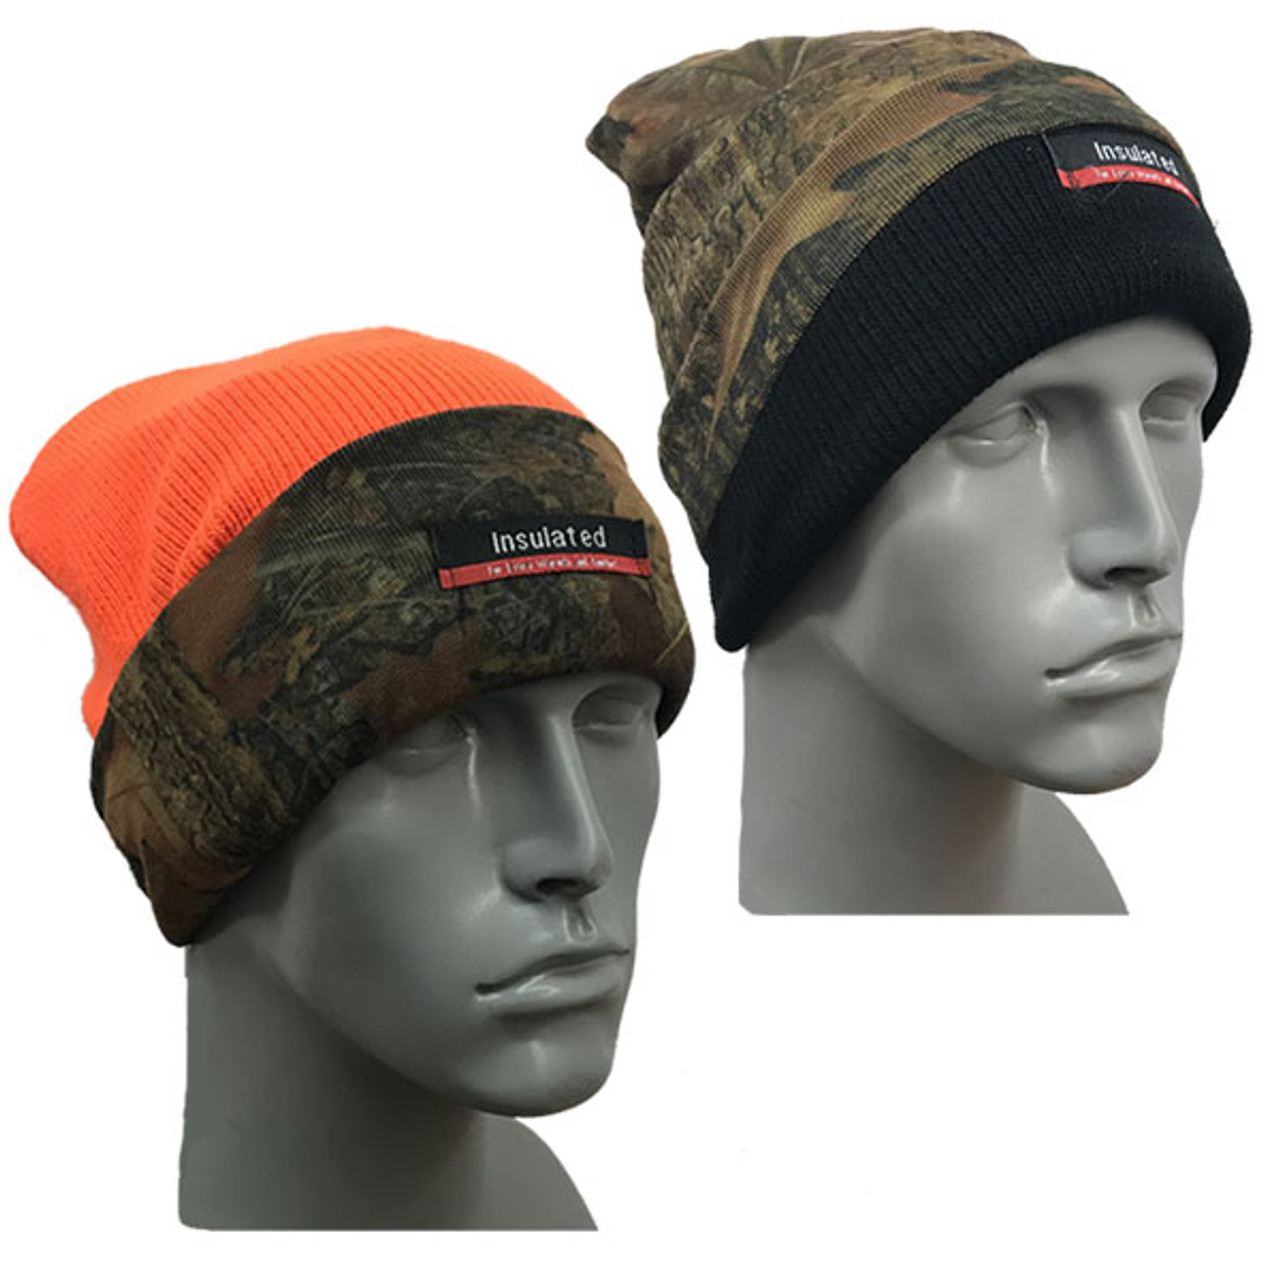 Insulated Reversible Camo / Orange Knit Hat